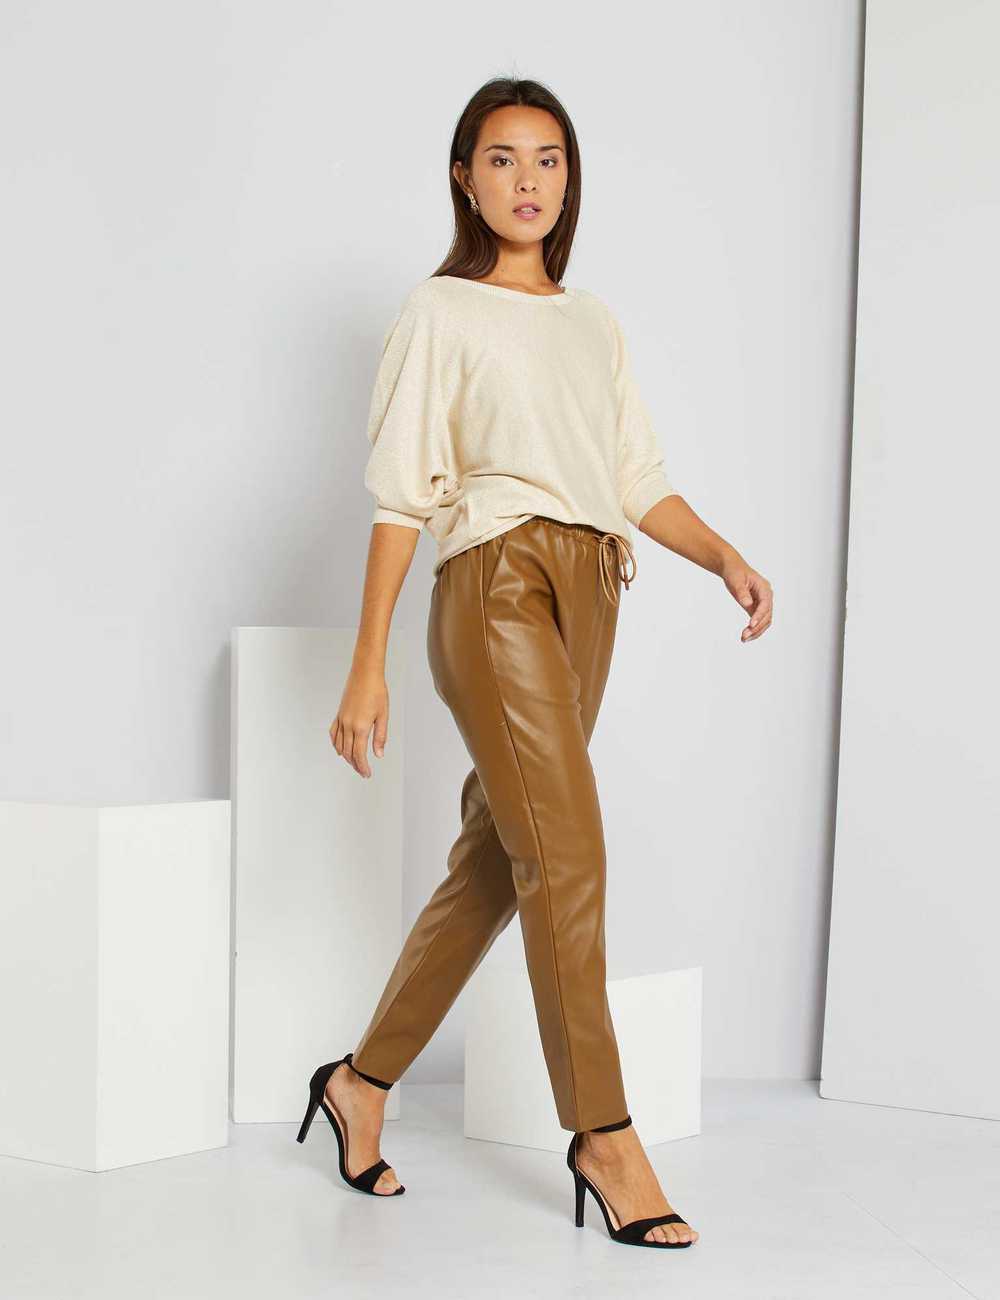 Leather Pants Women  Buy Leather Pants Women online at Best Prices in  India  Flipkartcom